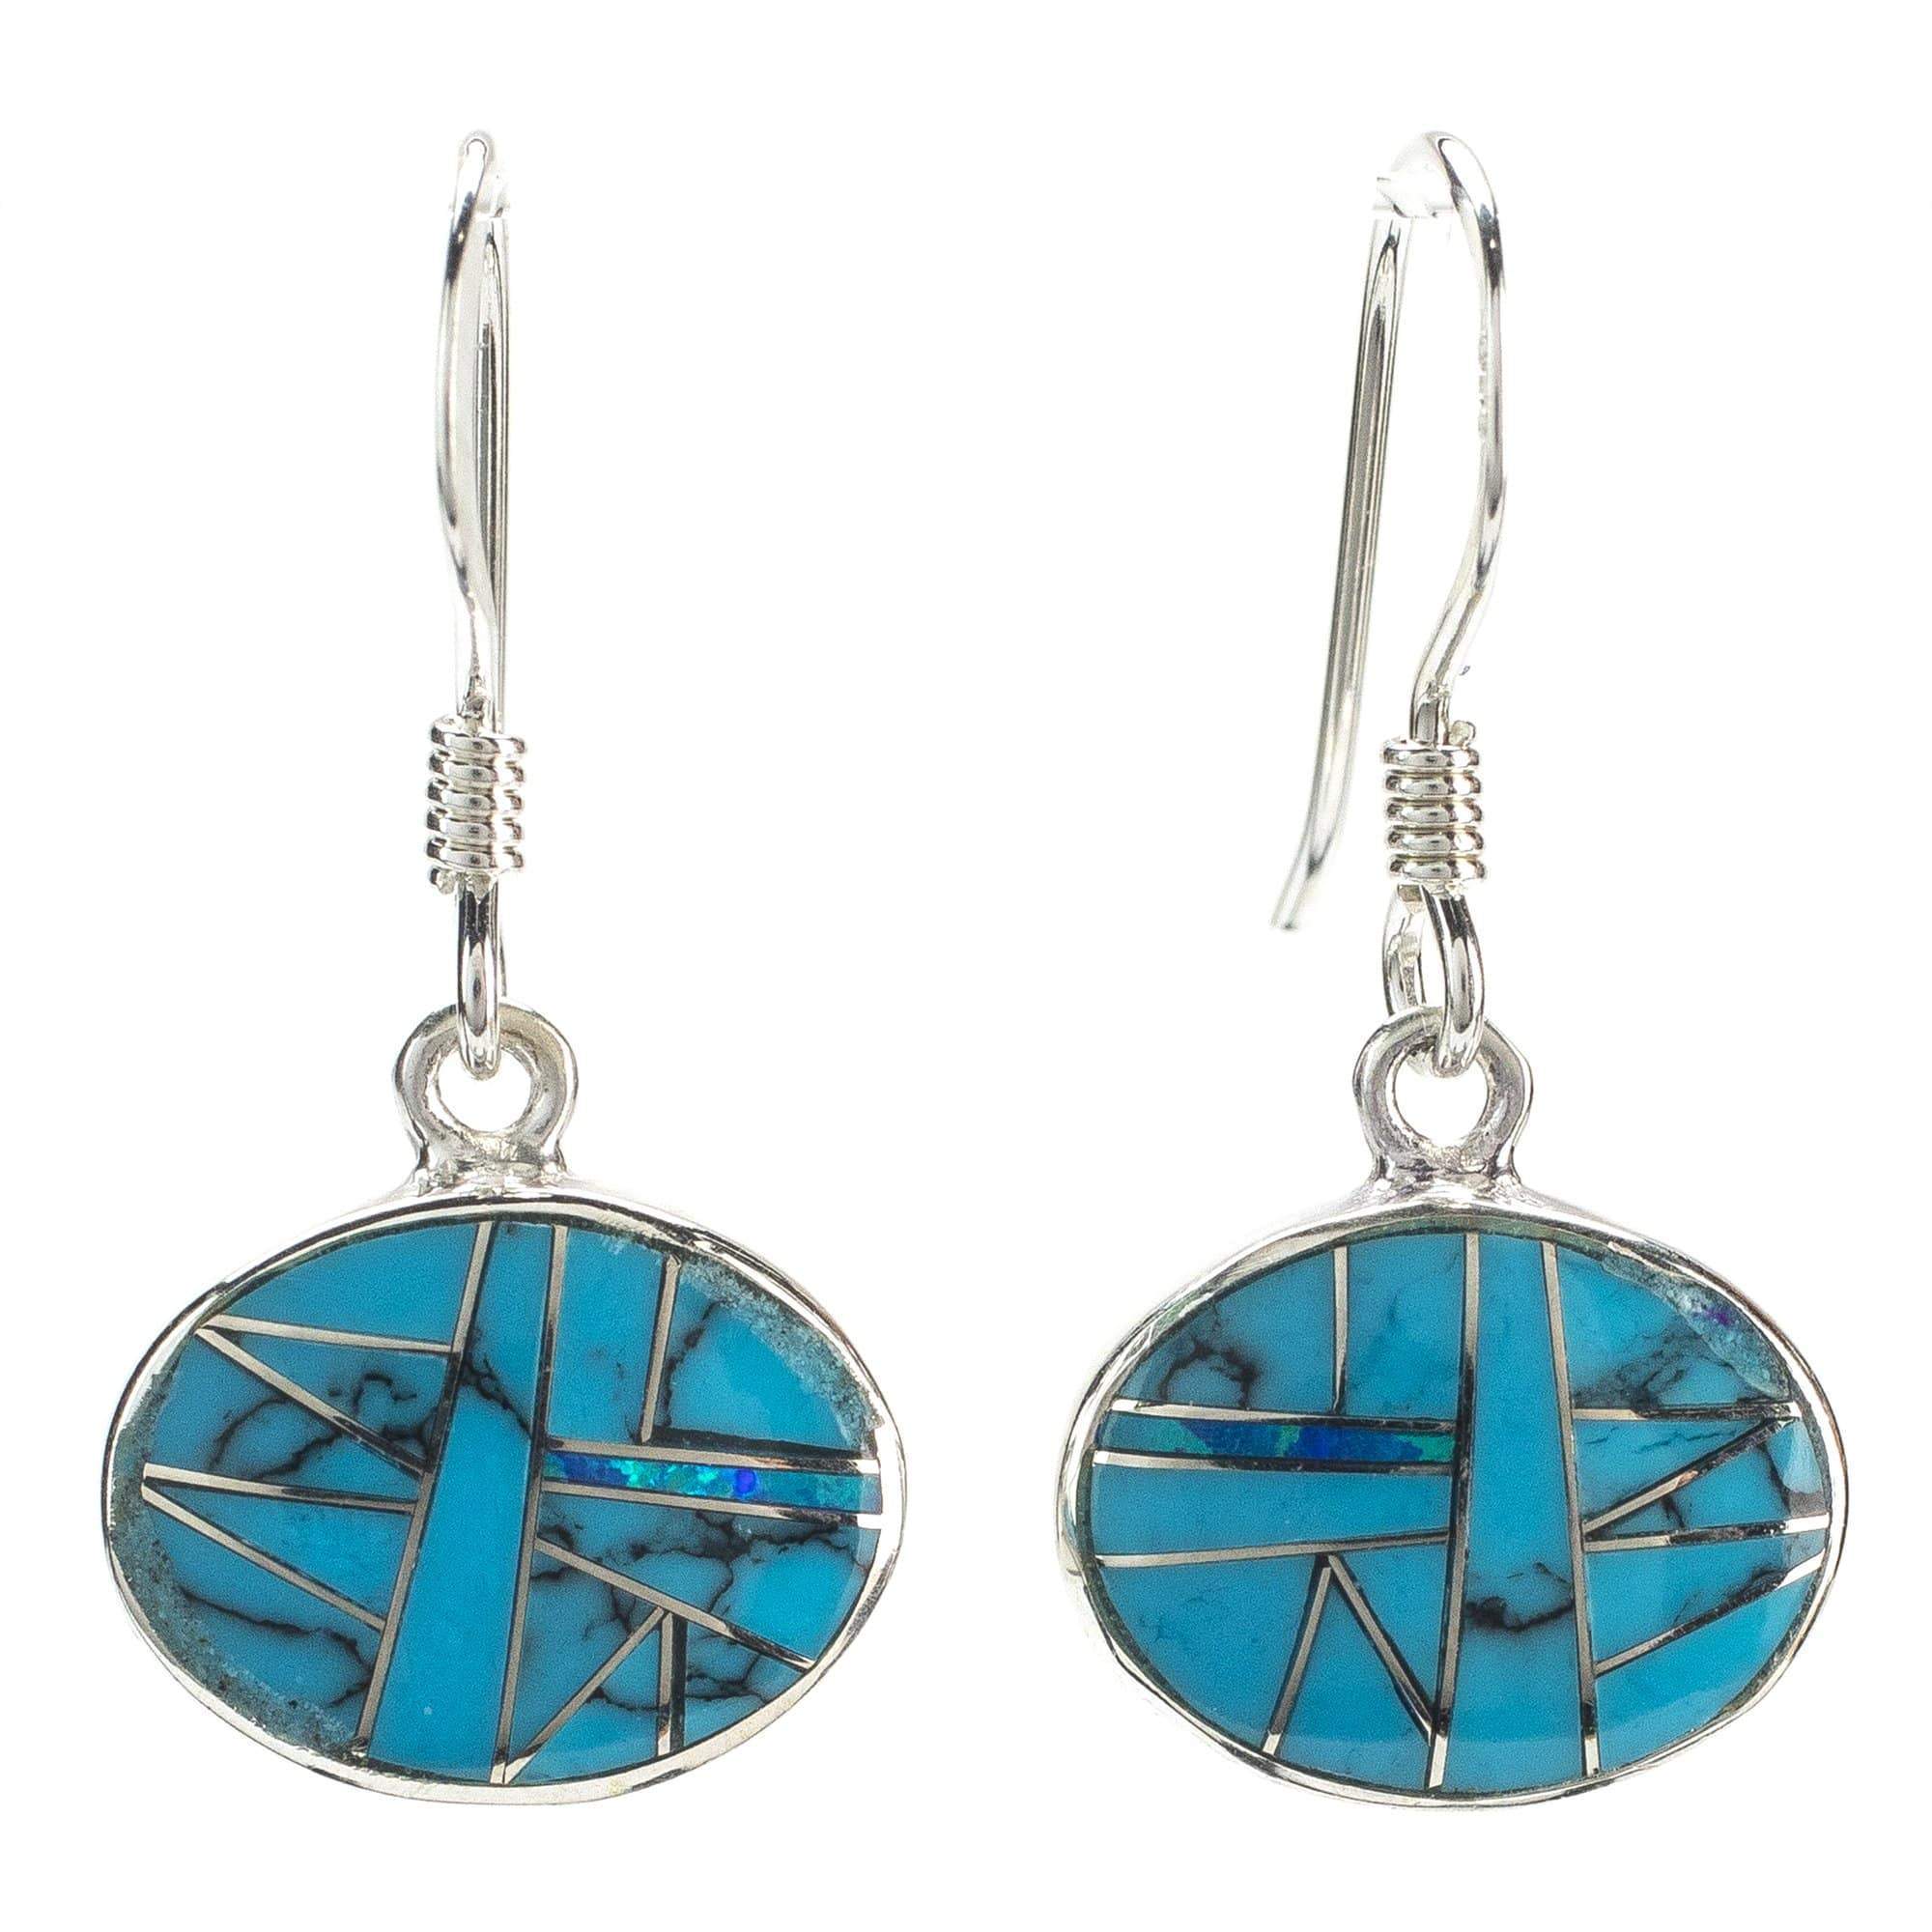 Kalifano Southwest Silver Jewelry Turquoise Dangle Oval Earrings 925 Sterling Silver Earring USA Handmade with Opal Accent NME.2015.TQ